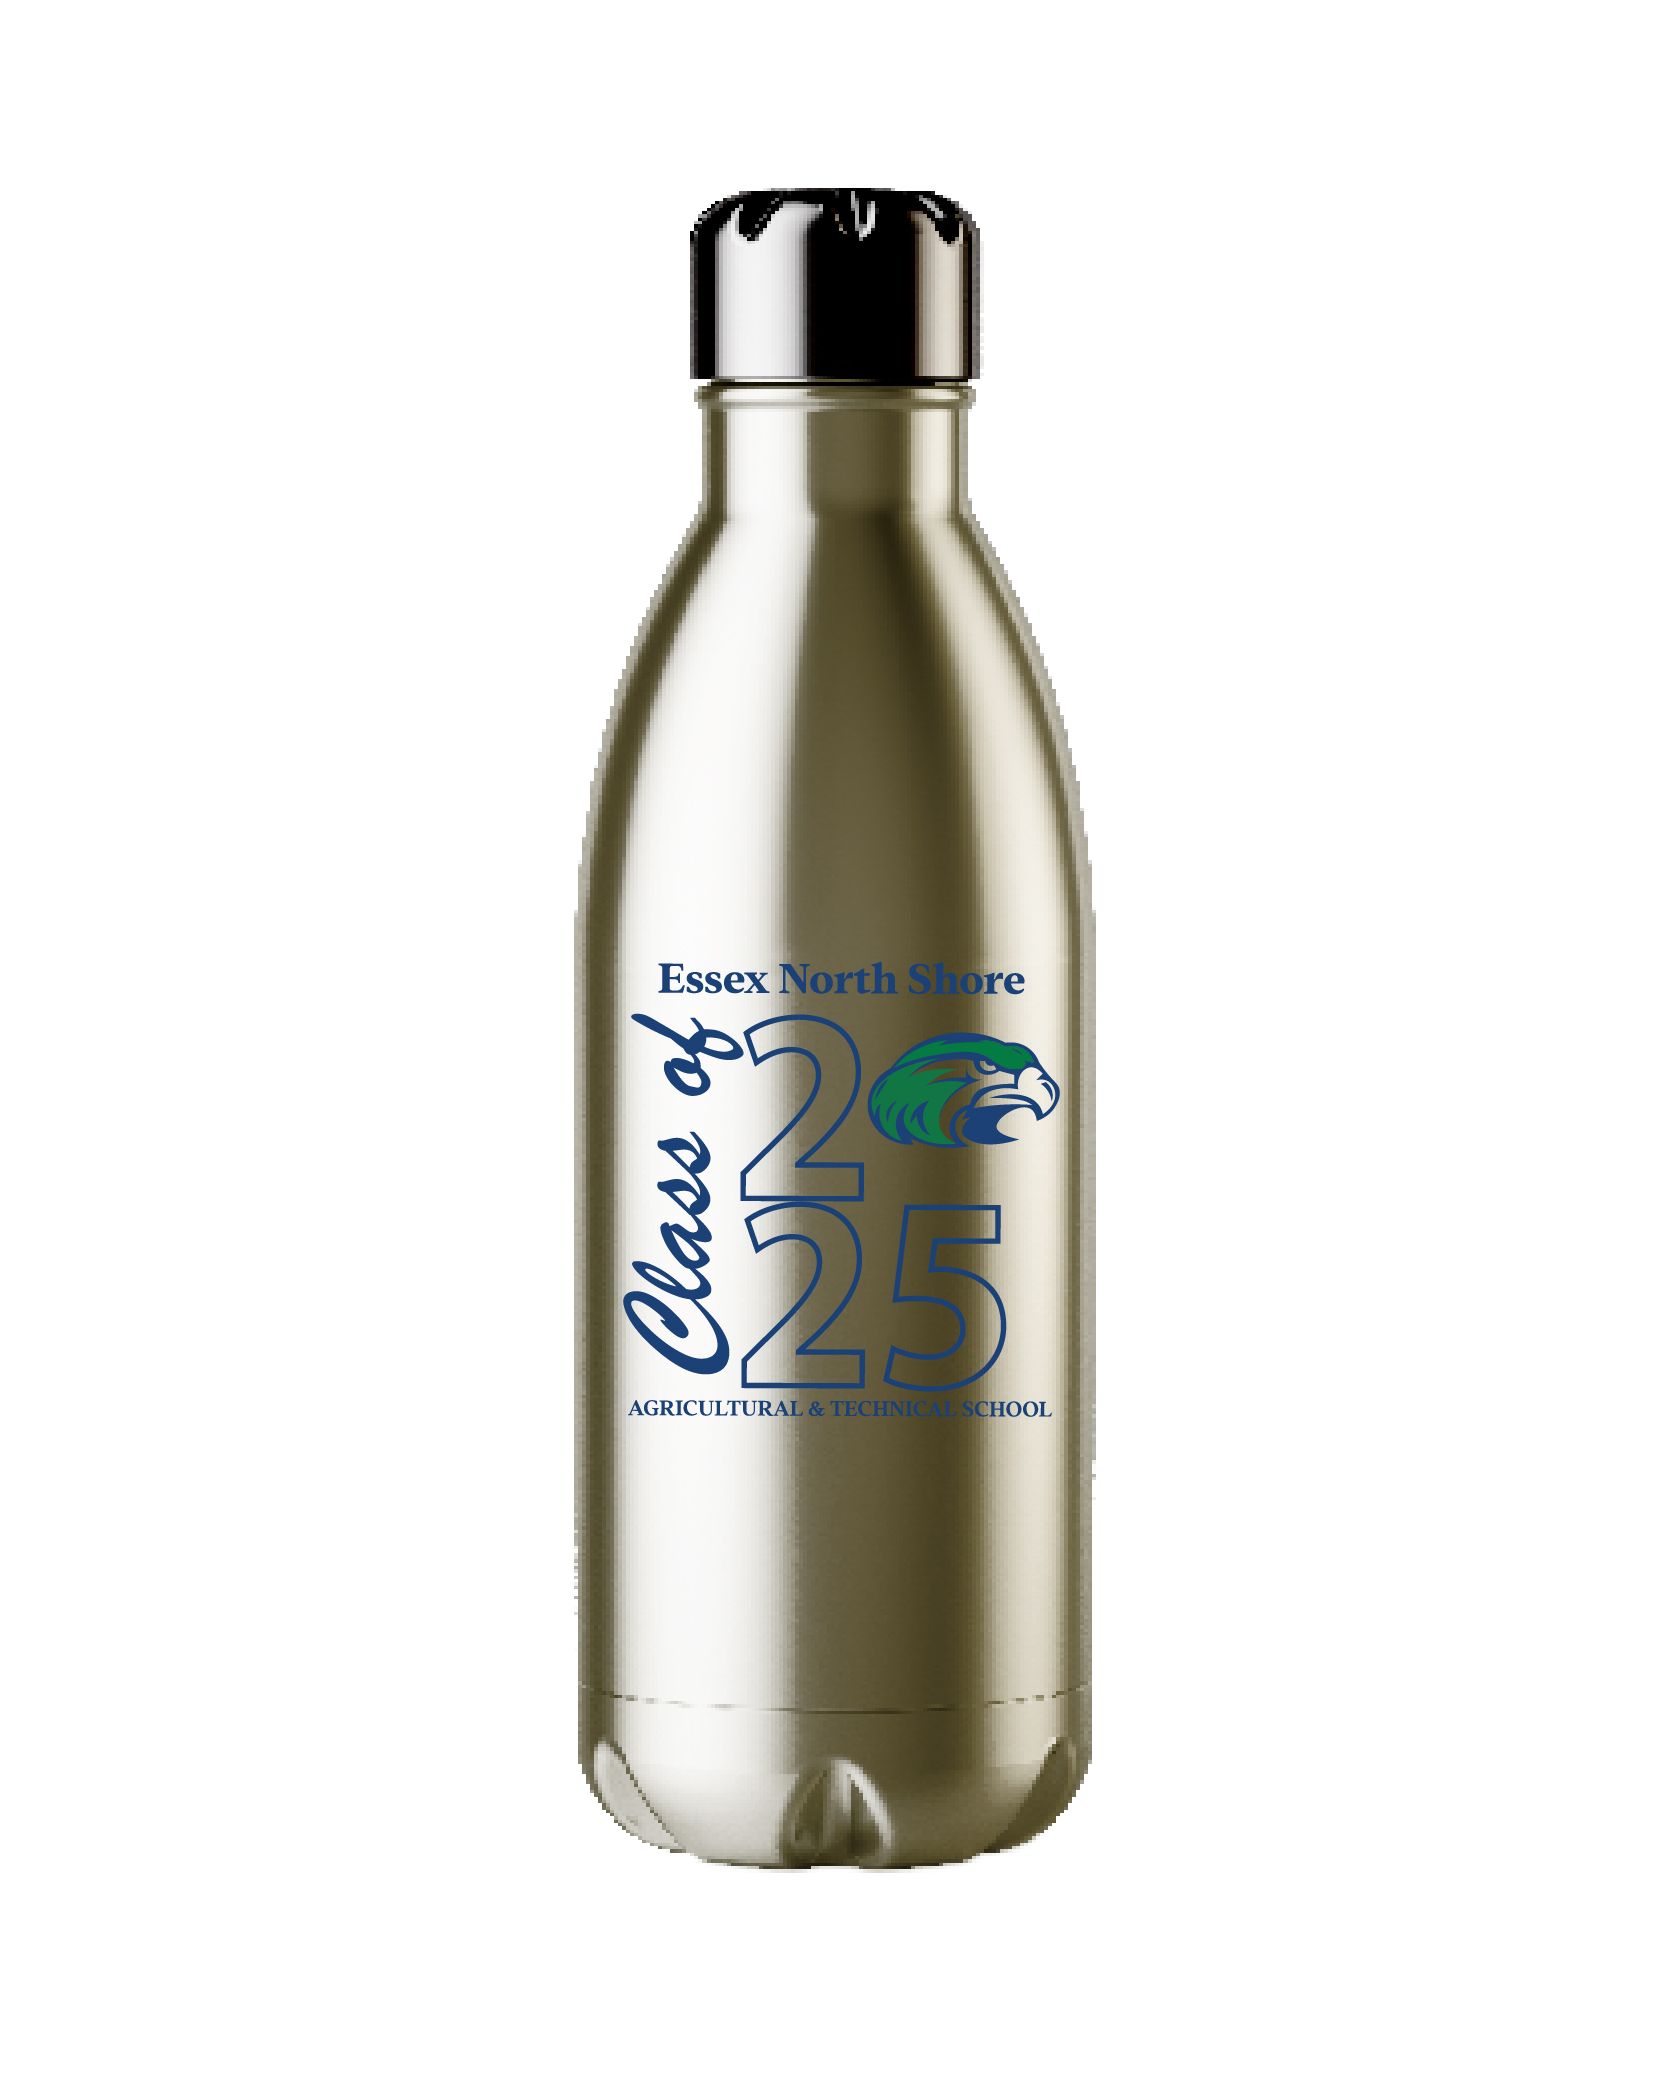 Essex North Shore PTO CLASS OF 2025 STAINLESS STEEL WATER BOTTLE - 17OZ